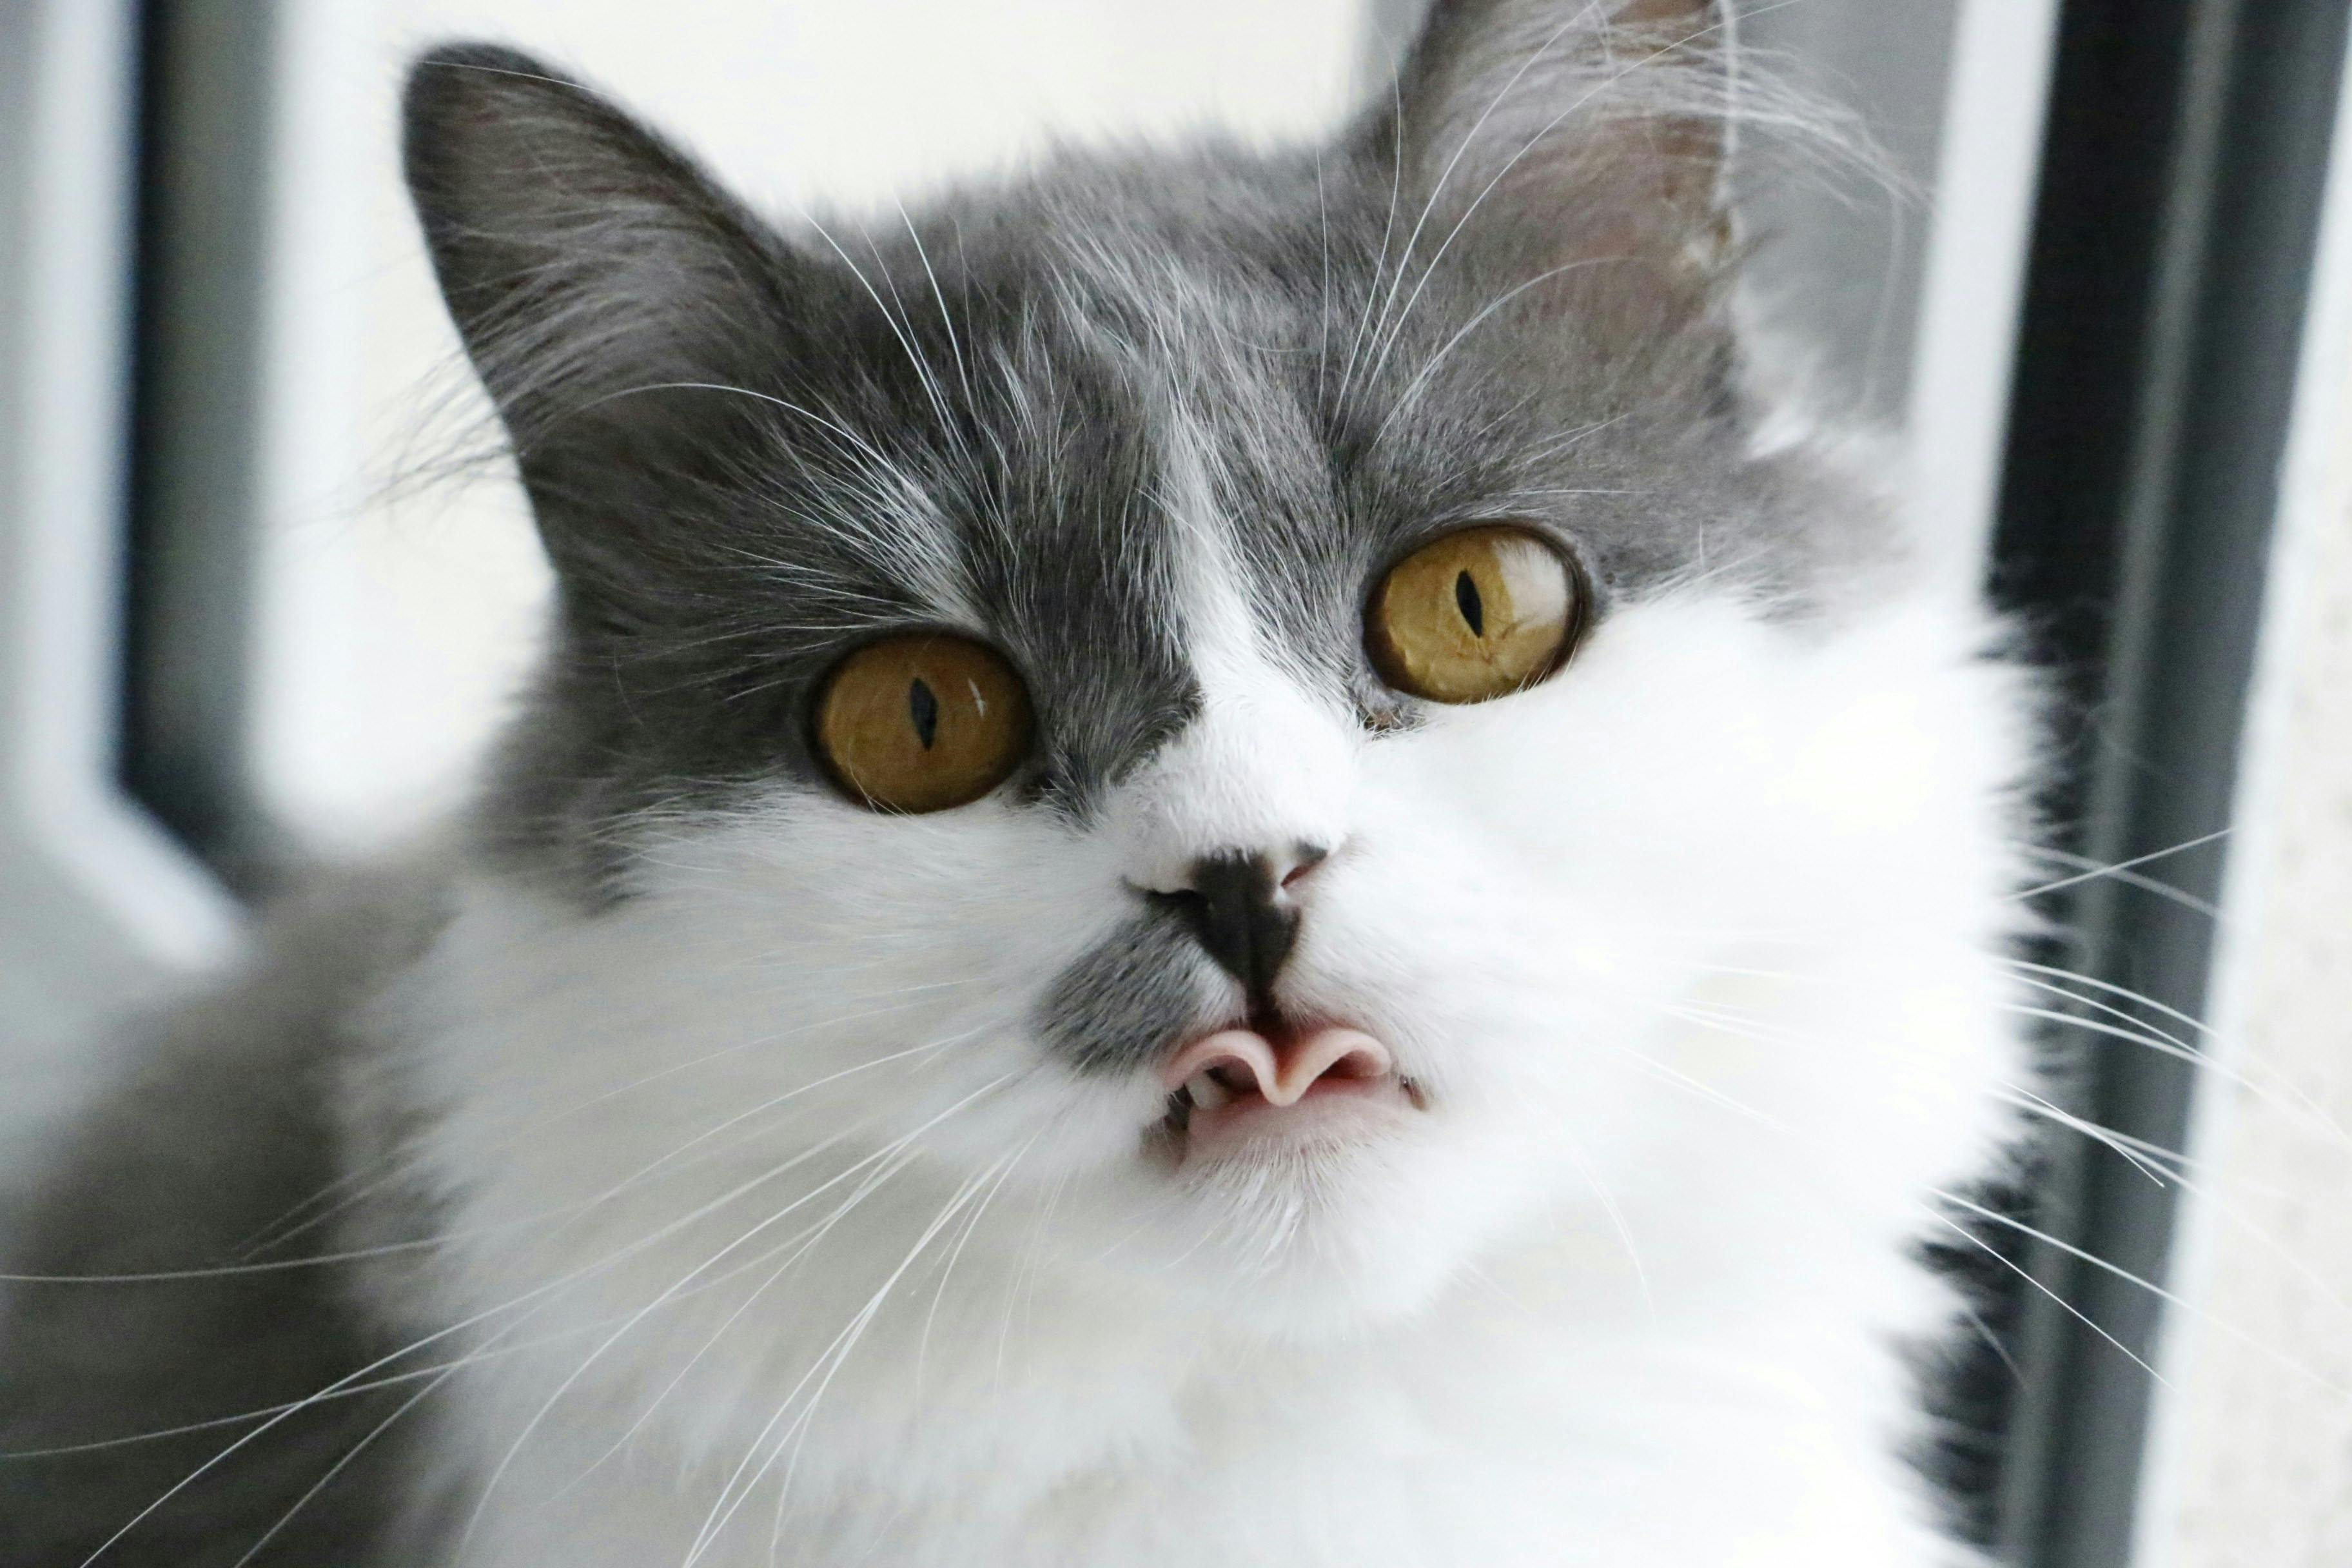 Close-up of a gray and white cat's face.